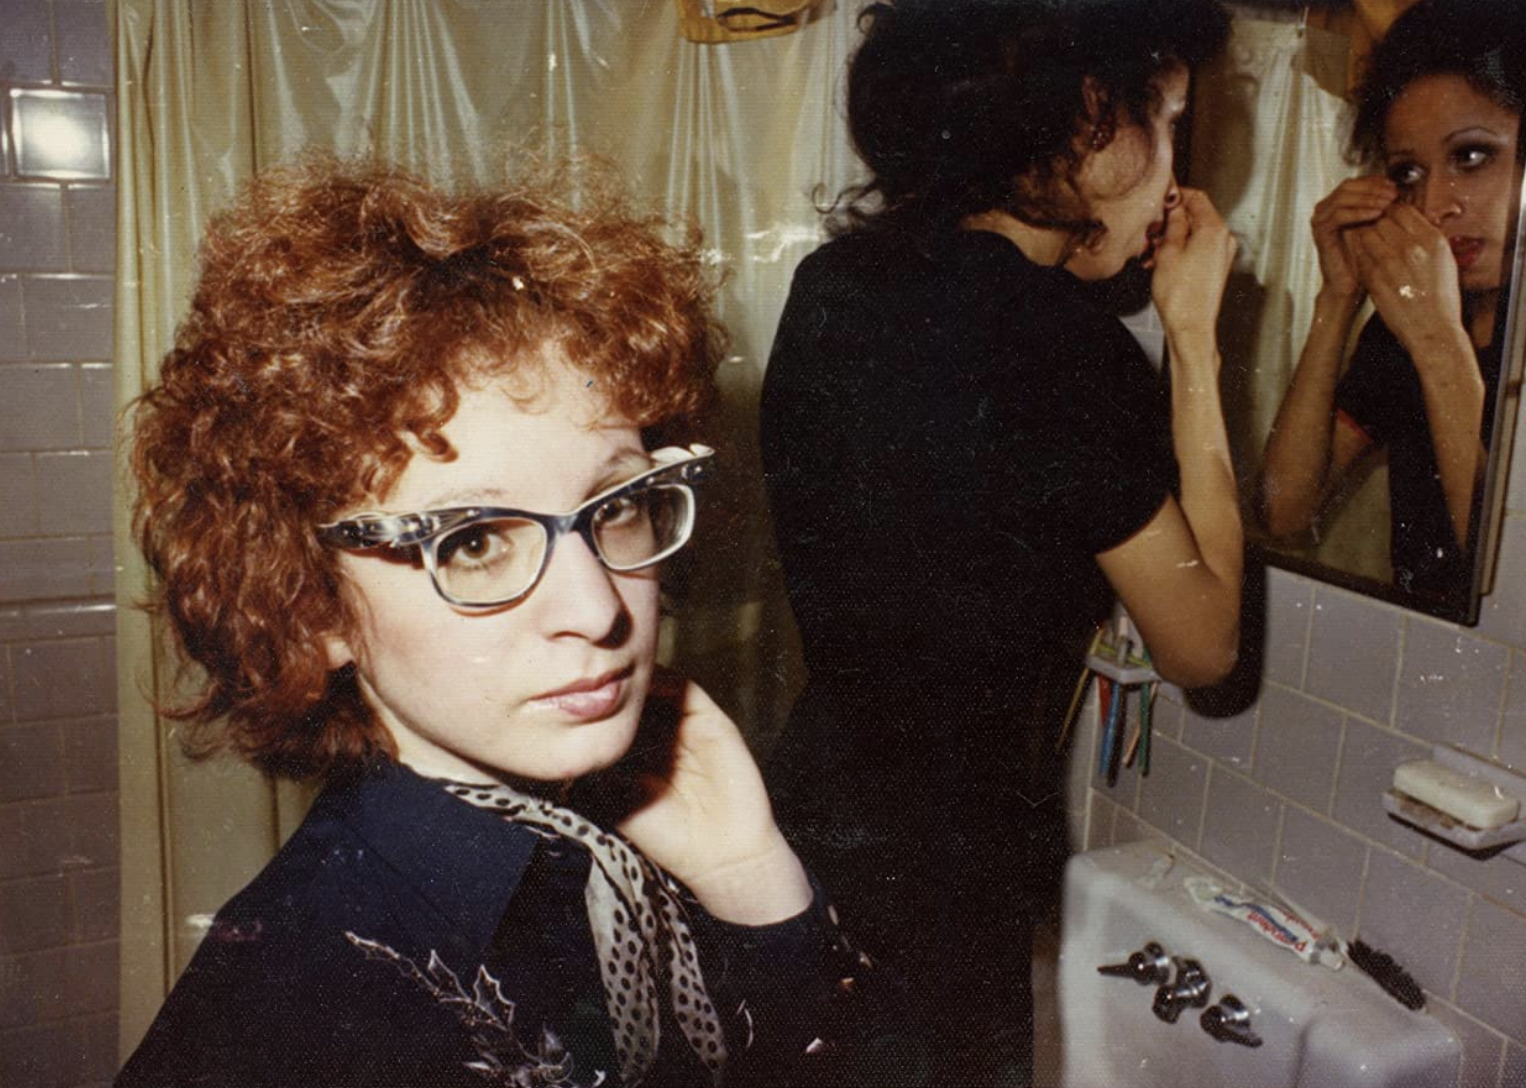 Nan Goldin in a scene from "All the Beauty and the Bloodshed".